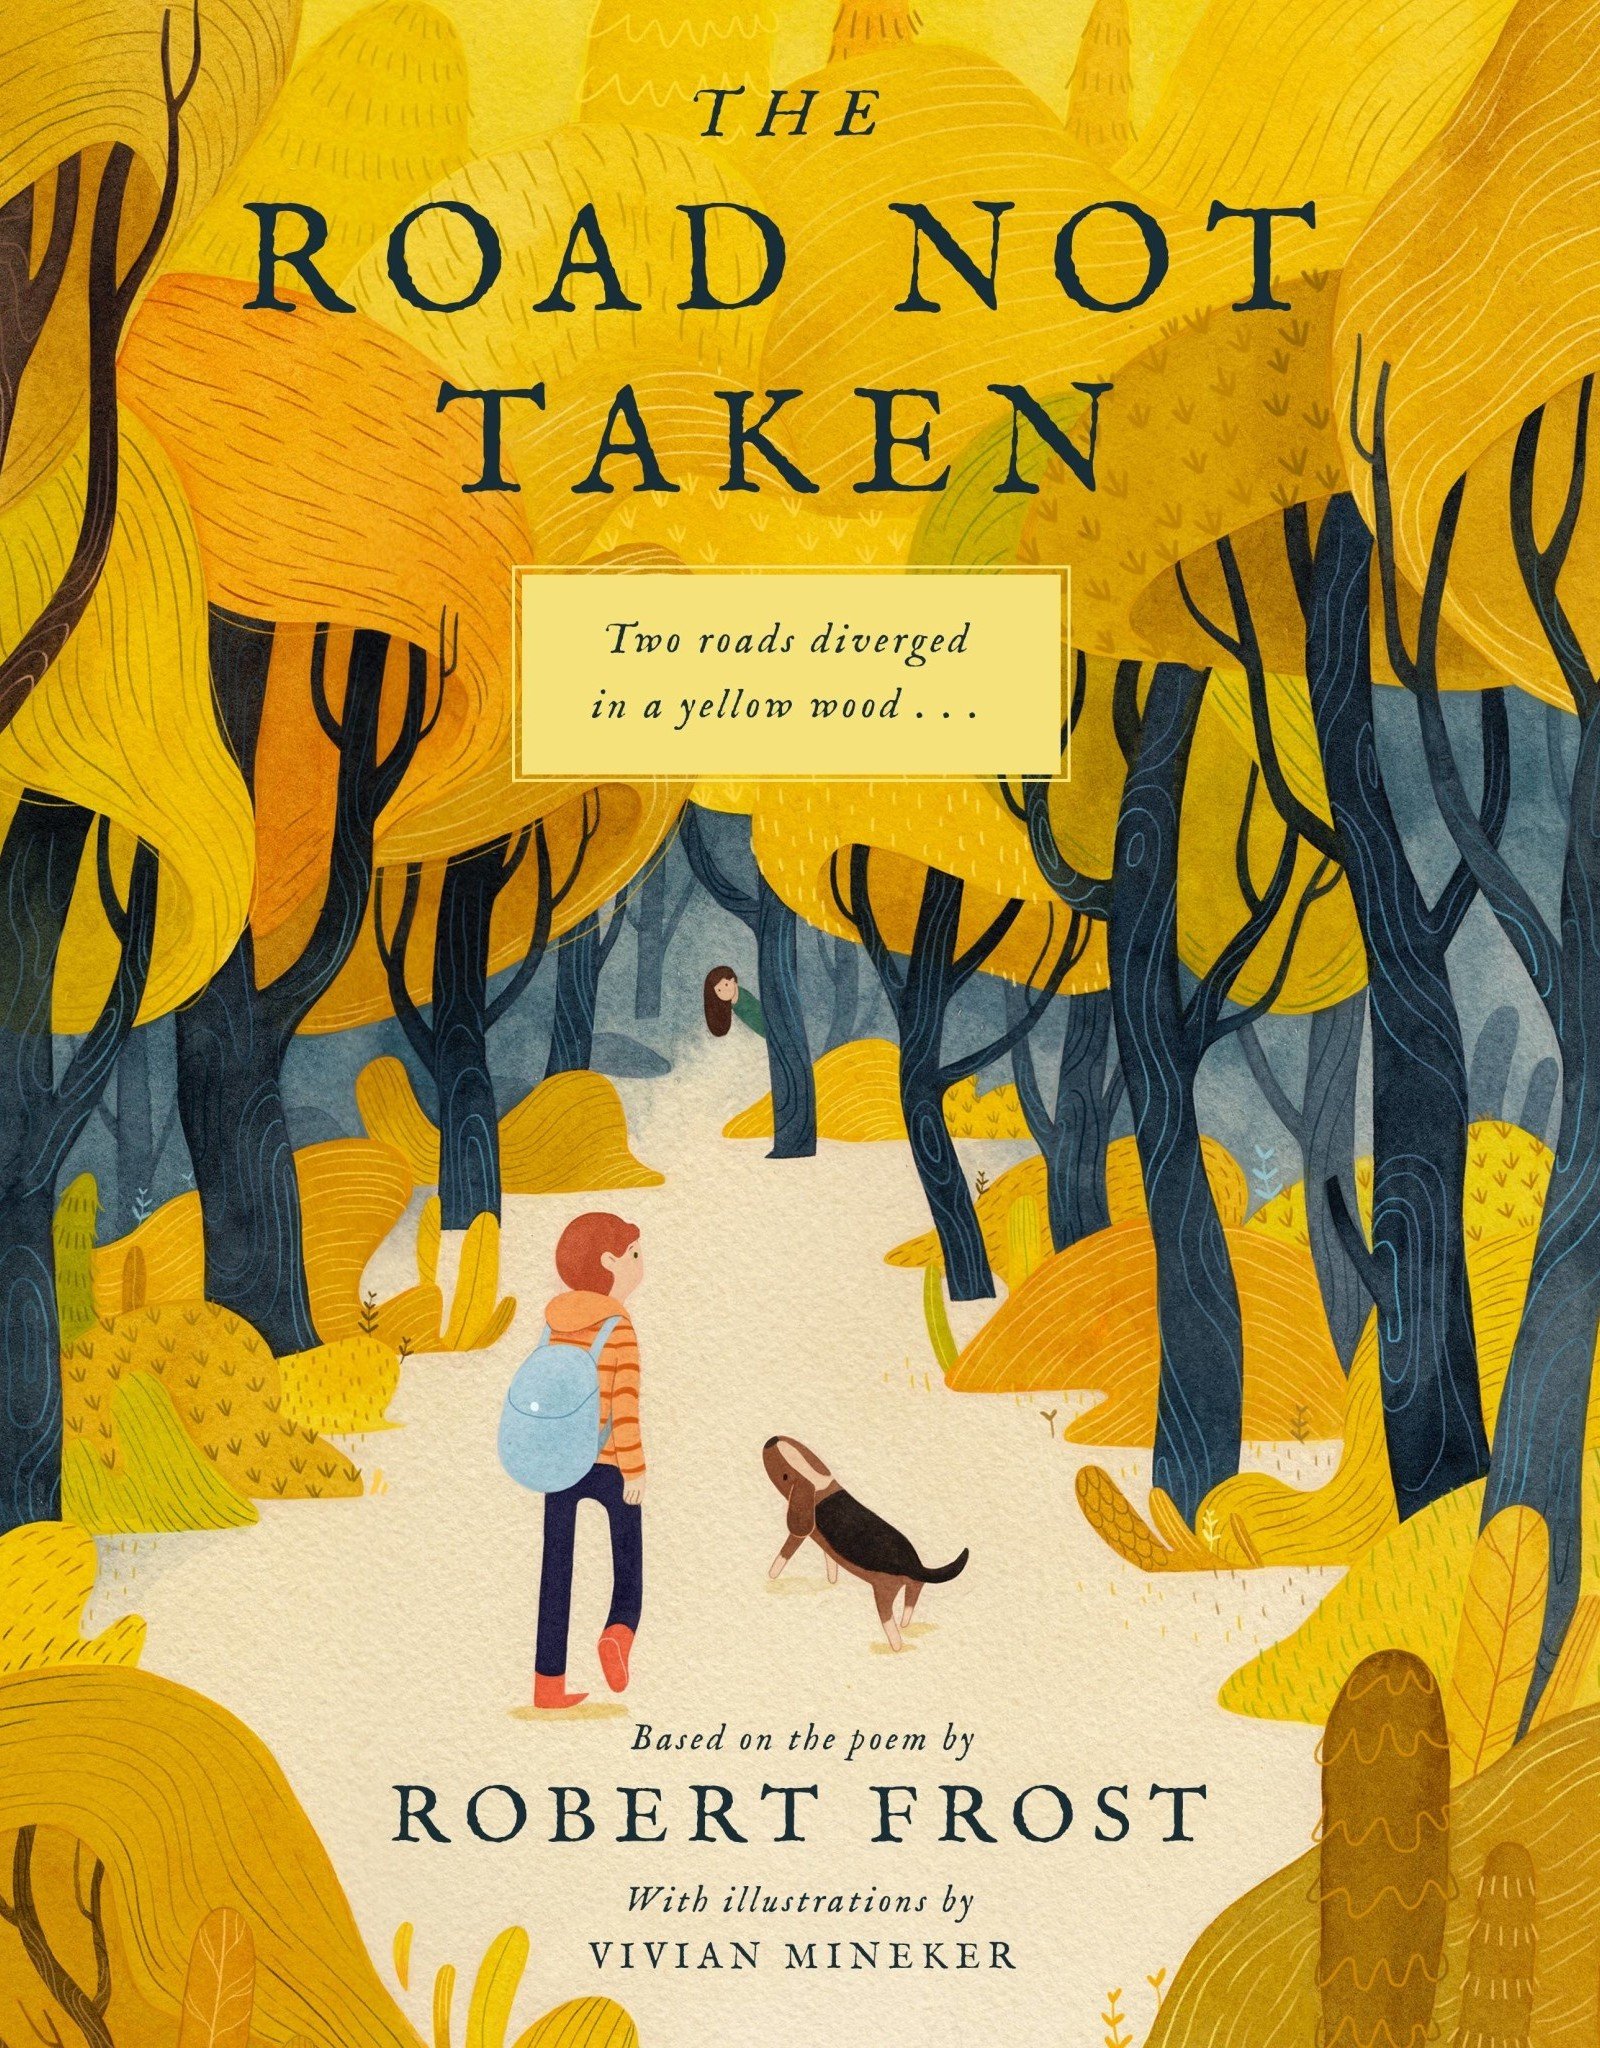 The Road Not Taken:  An Illustrated Picture Book